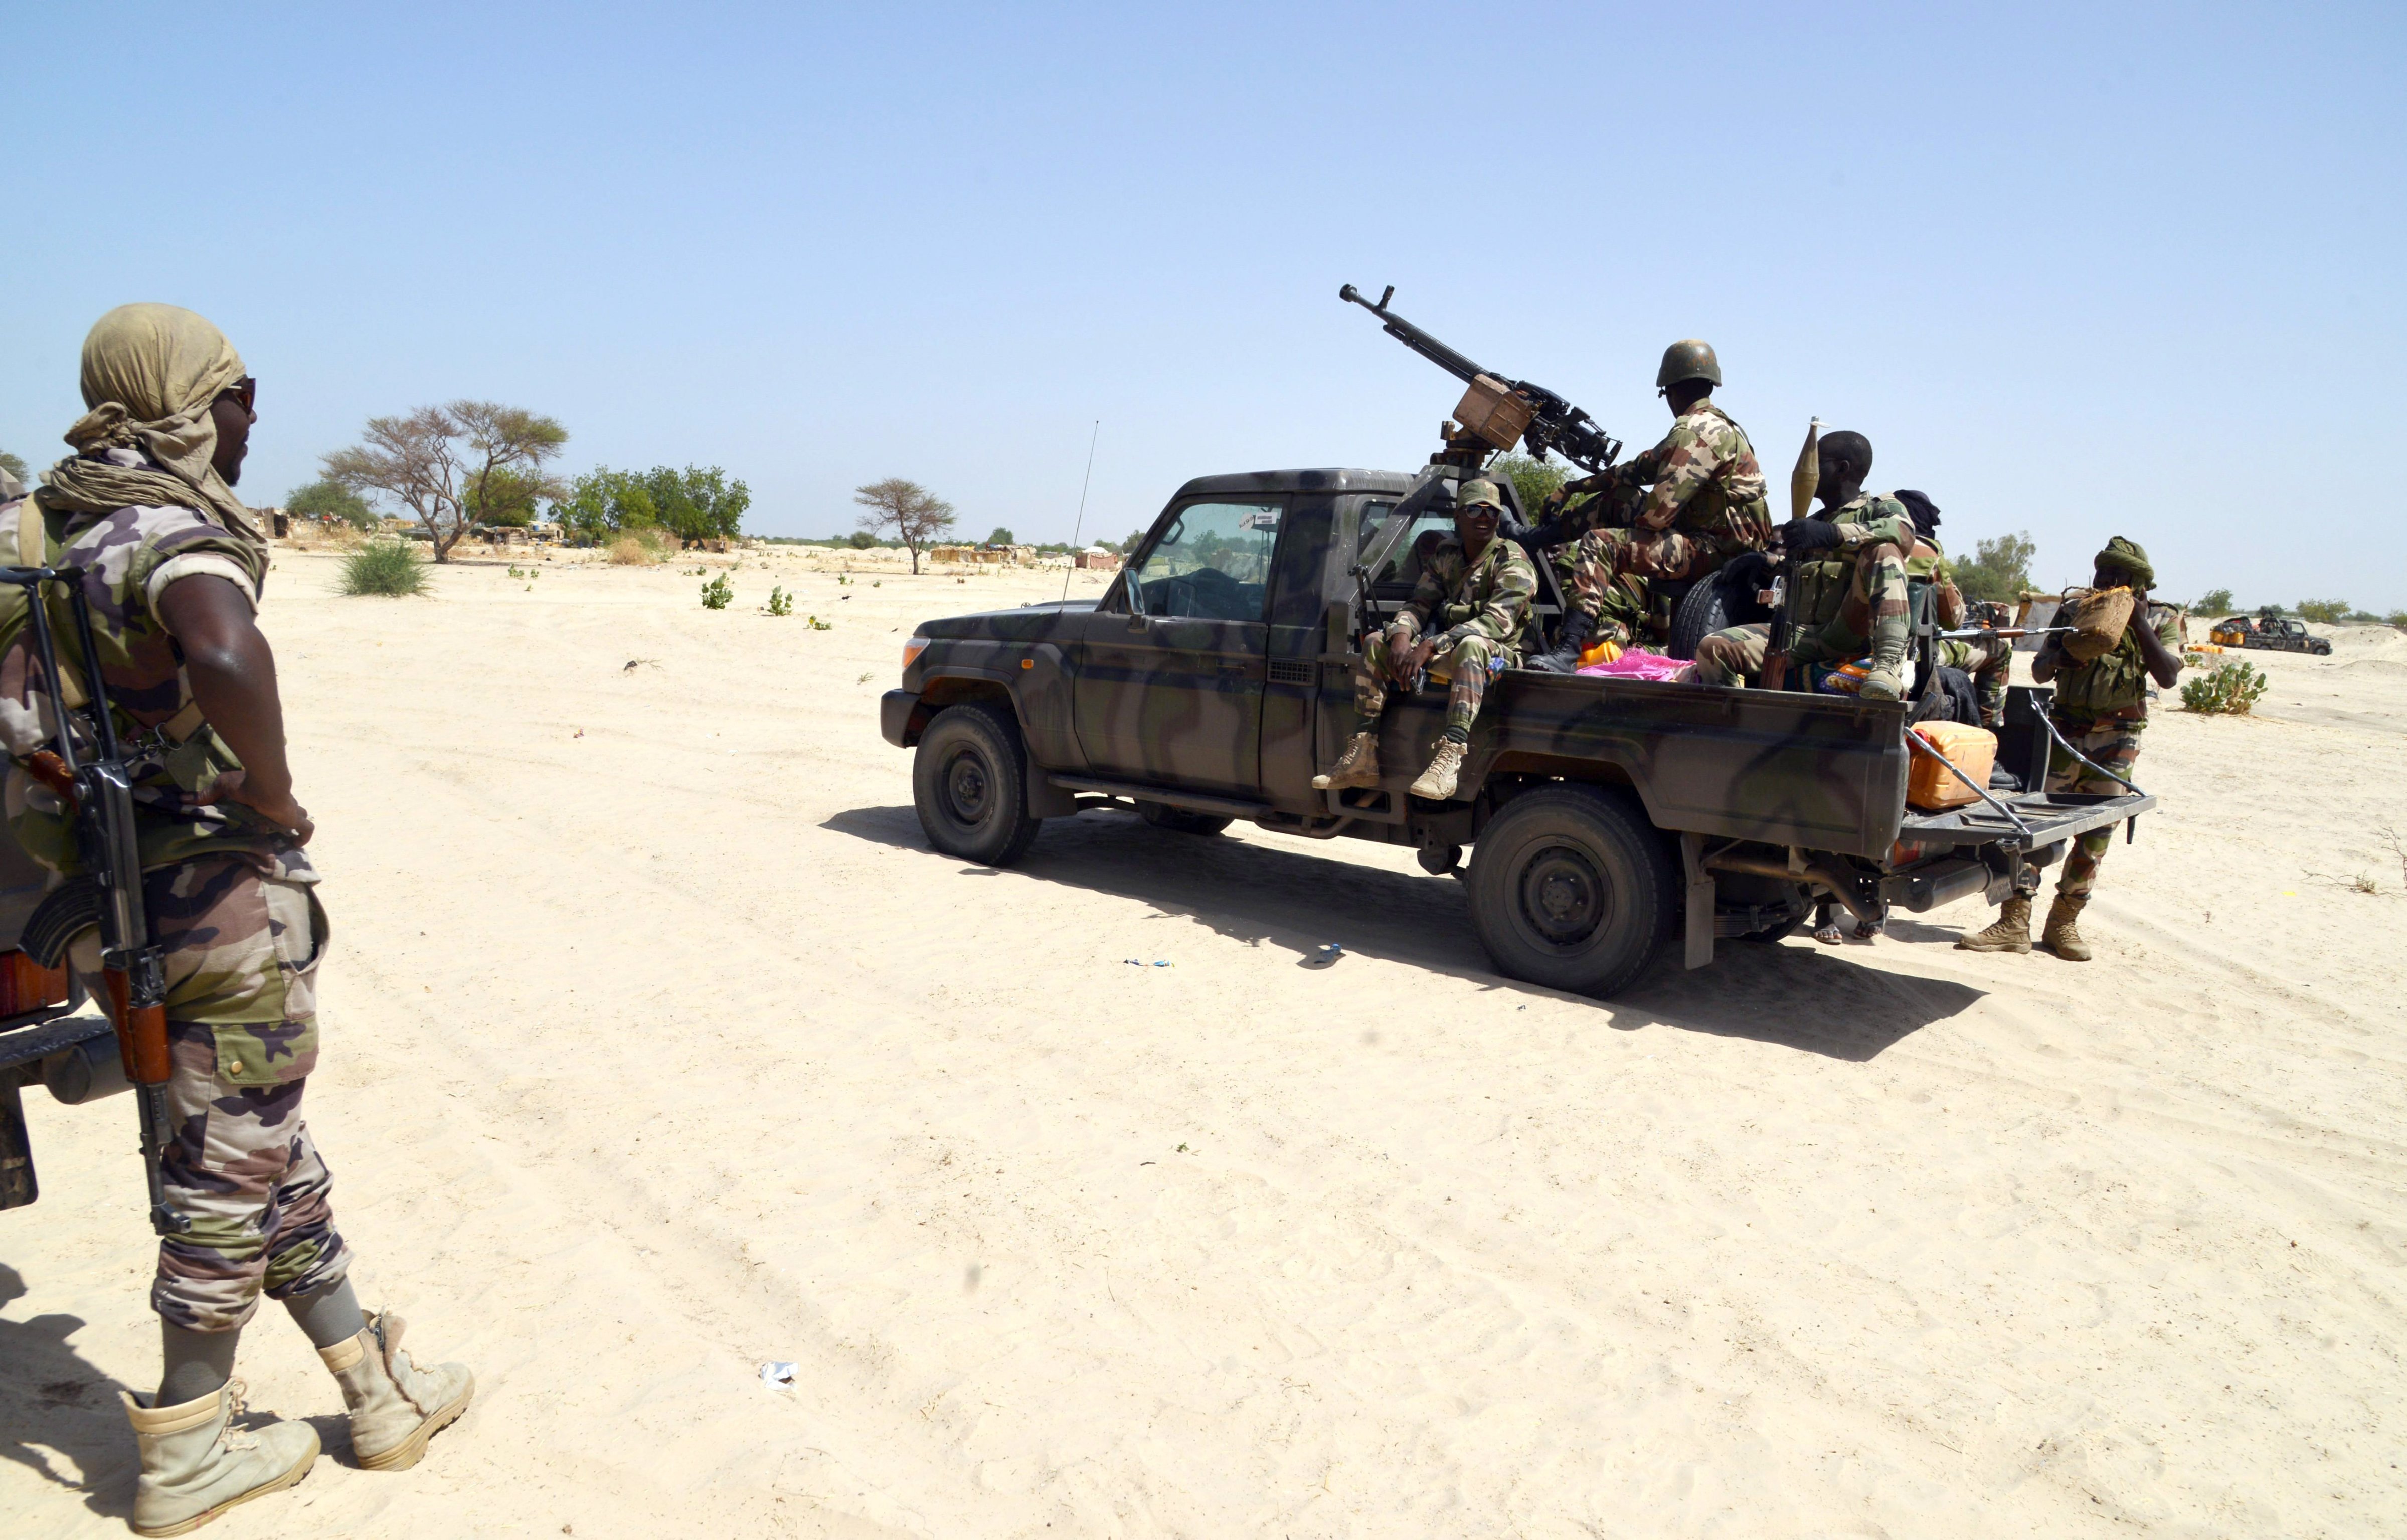 Niger soldiers ride in a military vehicle on May 25, 2015 in Malam Fatori, in northern Nigeria, near the border with Nige. (Issouf Sanogo—AFP/Getty Images)